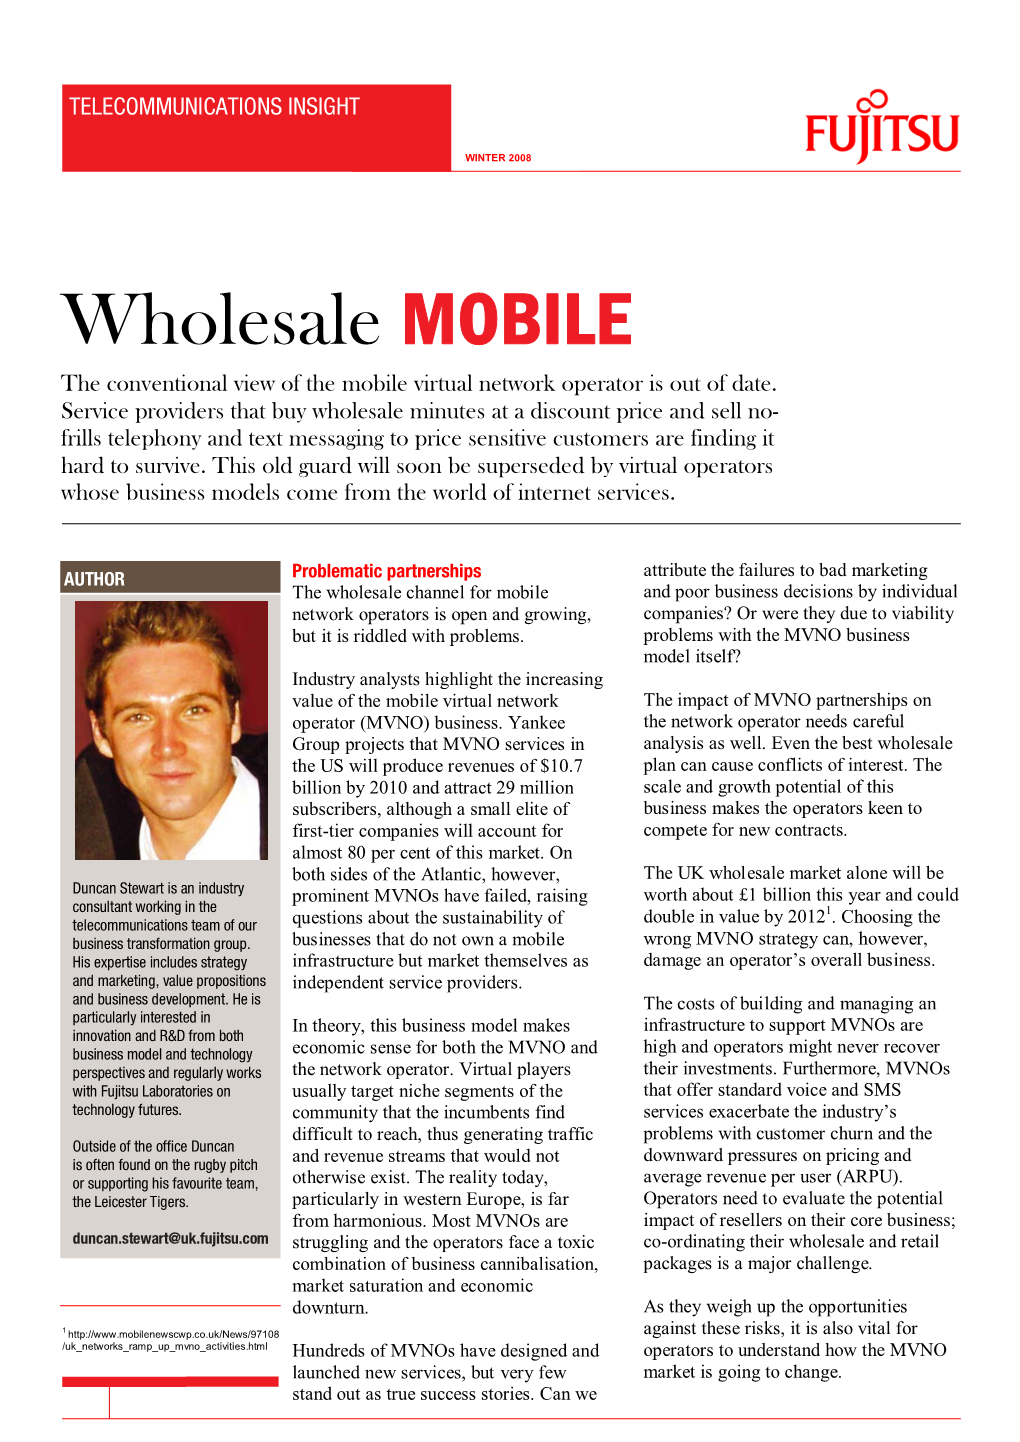 Wholesale MOBILE the Conventional View of the Mobile Virtual Network Operator Is out of Date